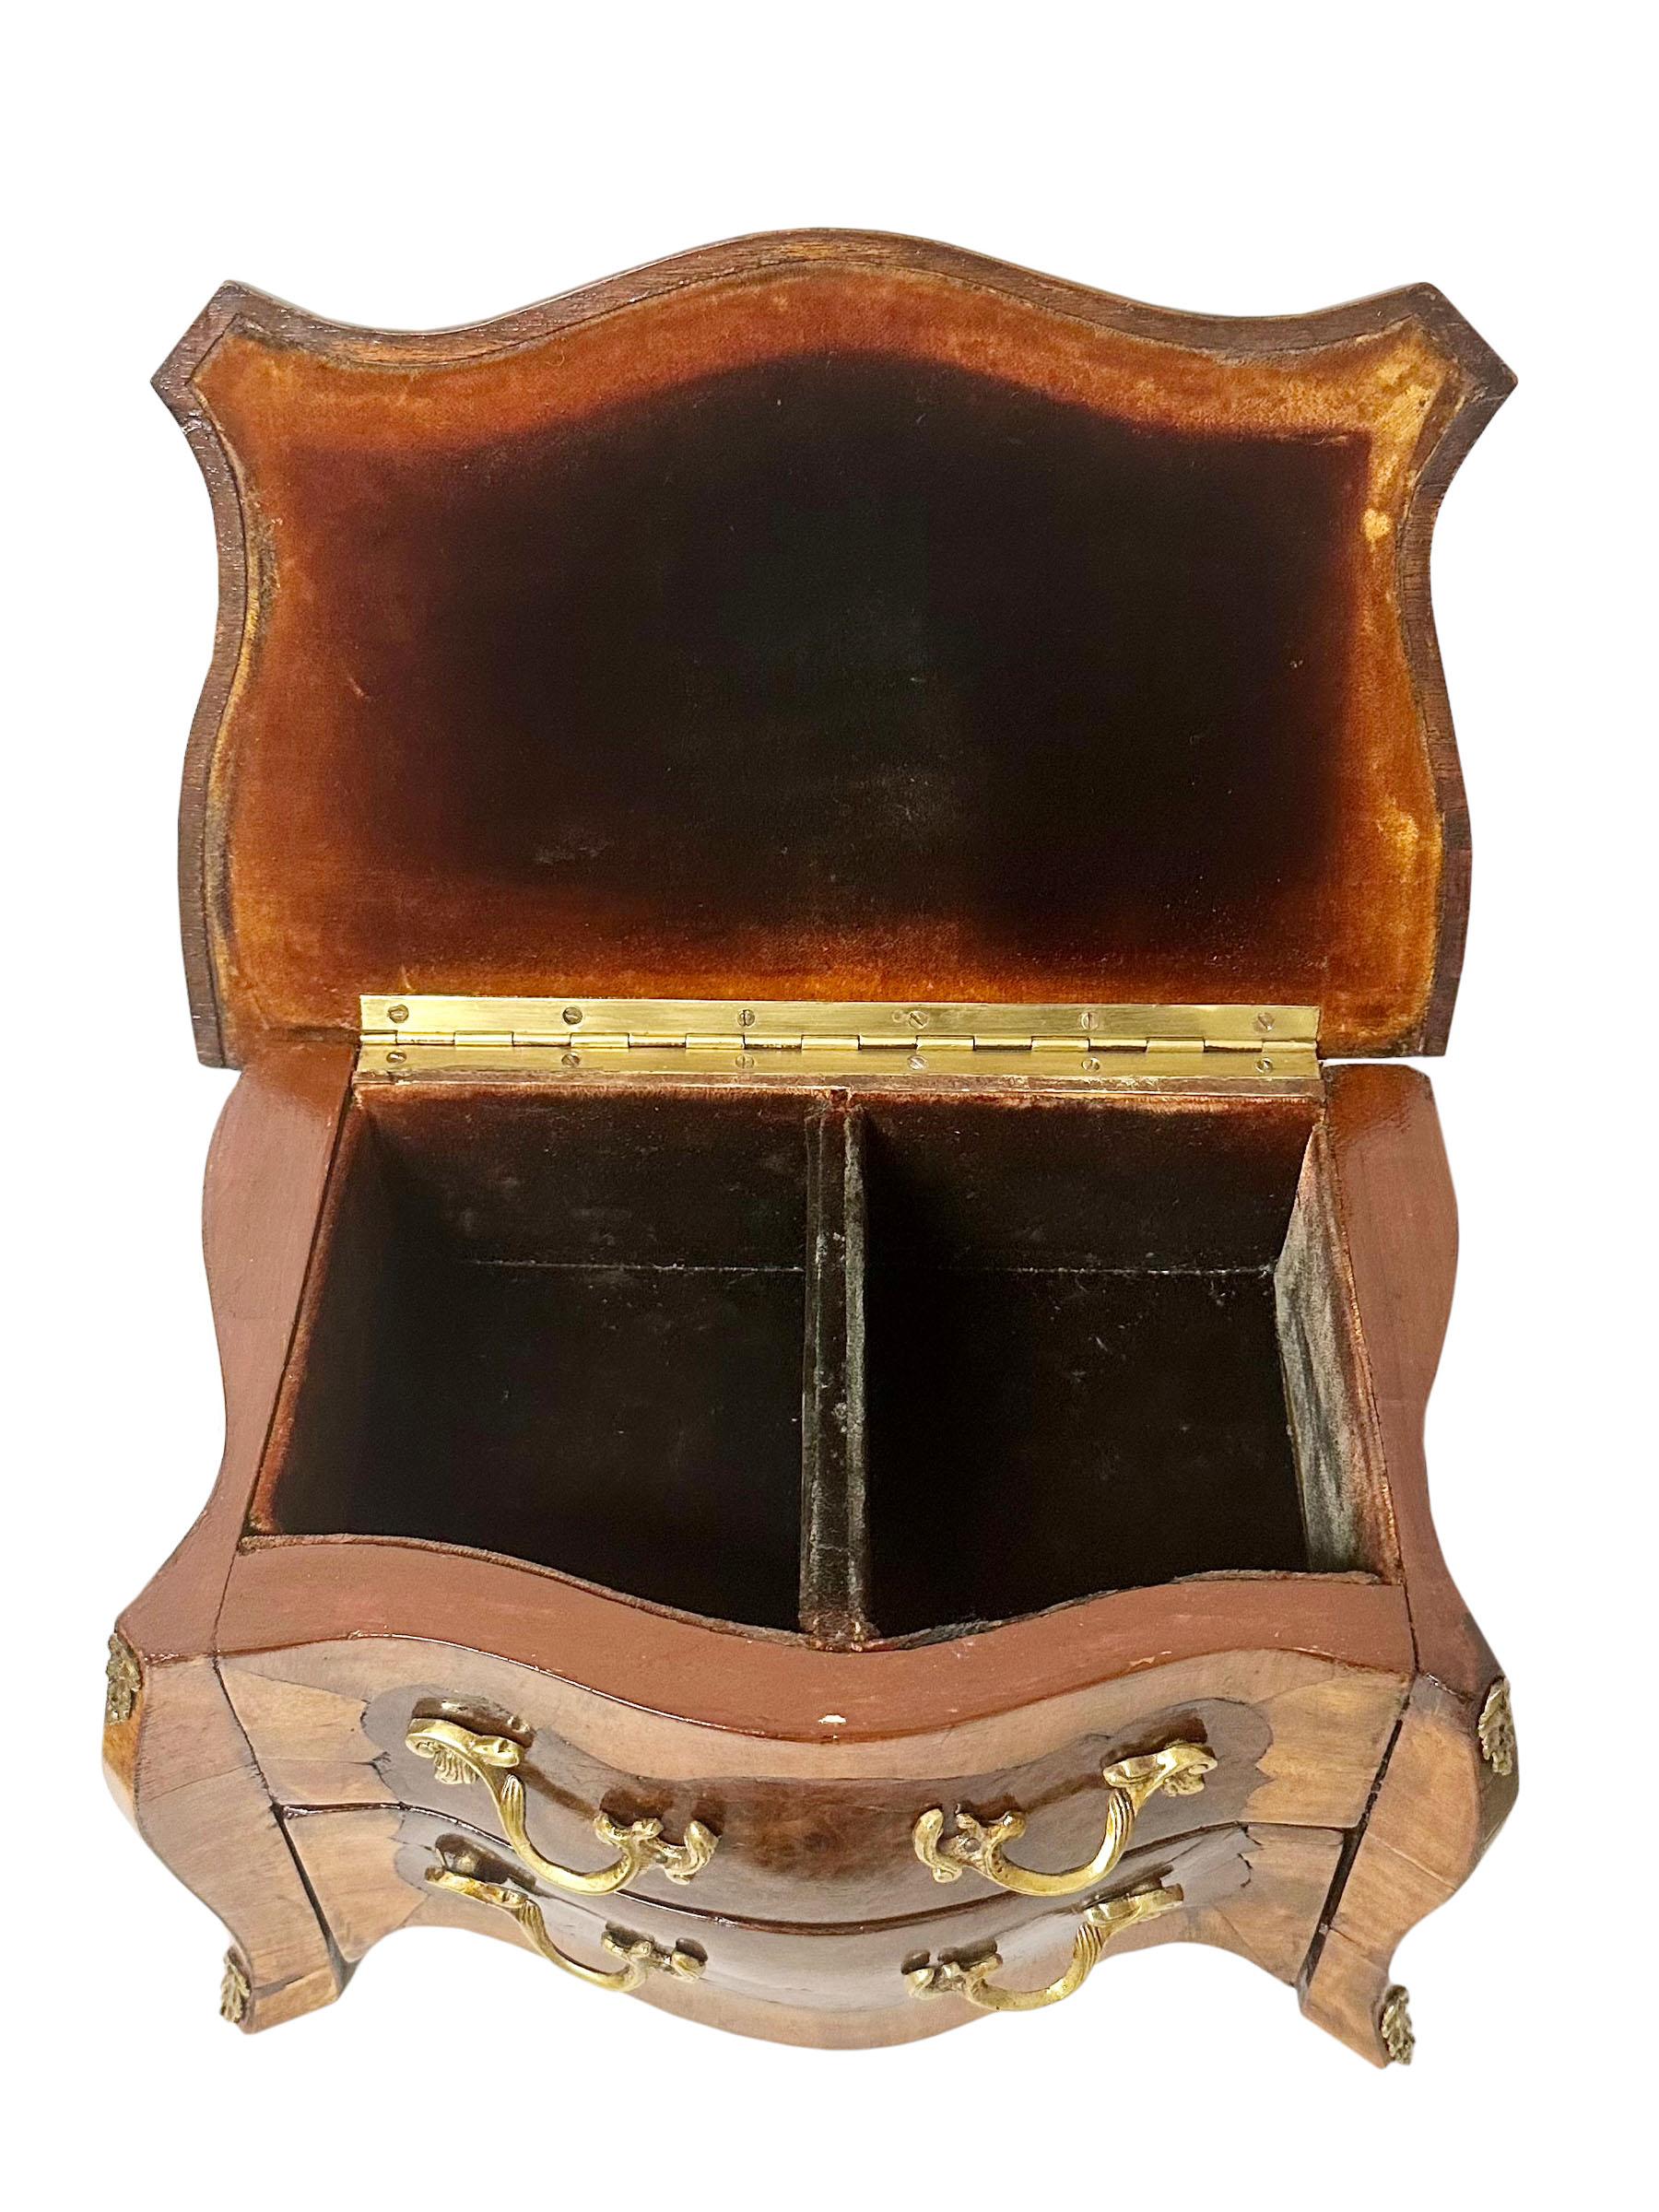 Early 19th Century French Inlaid Diminutive Commode Jewelry Box  For Sale